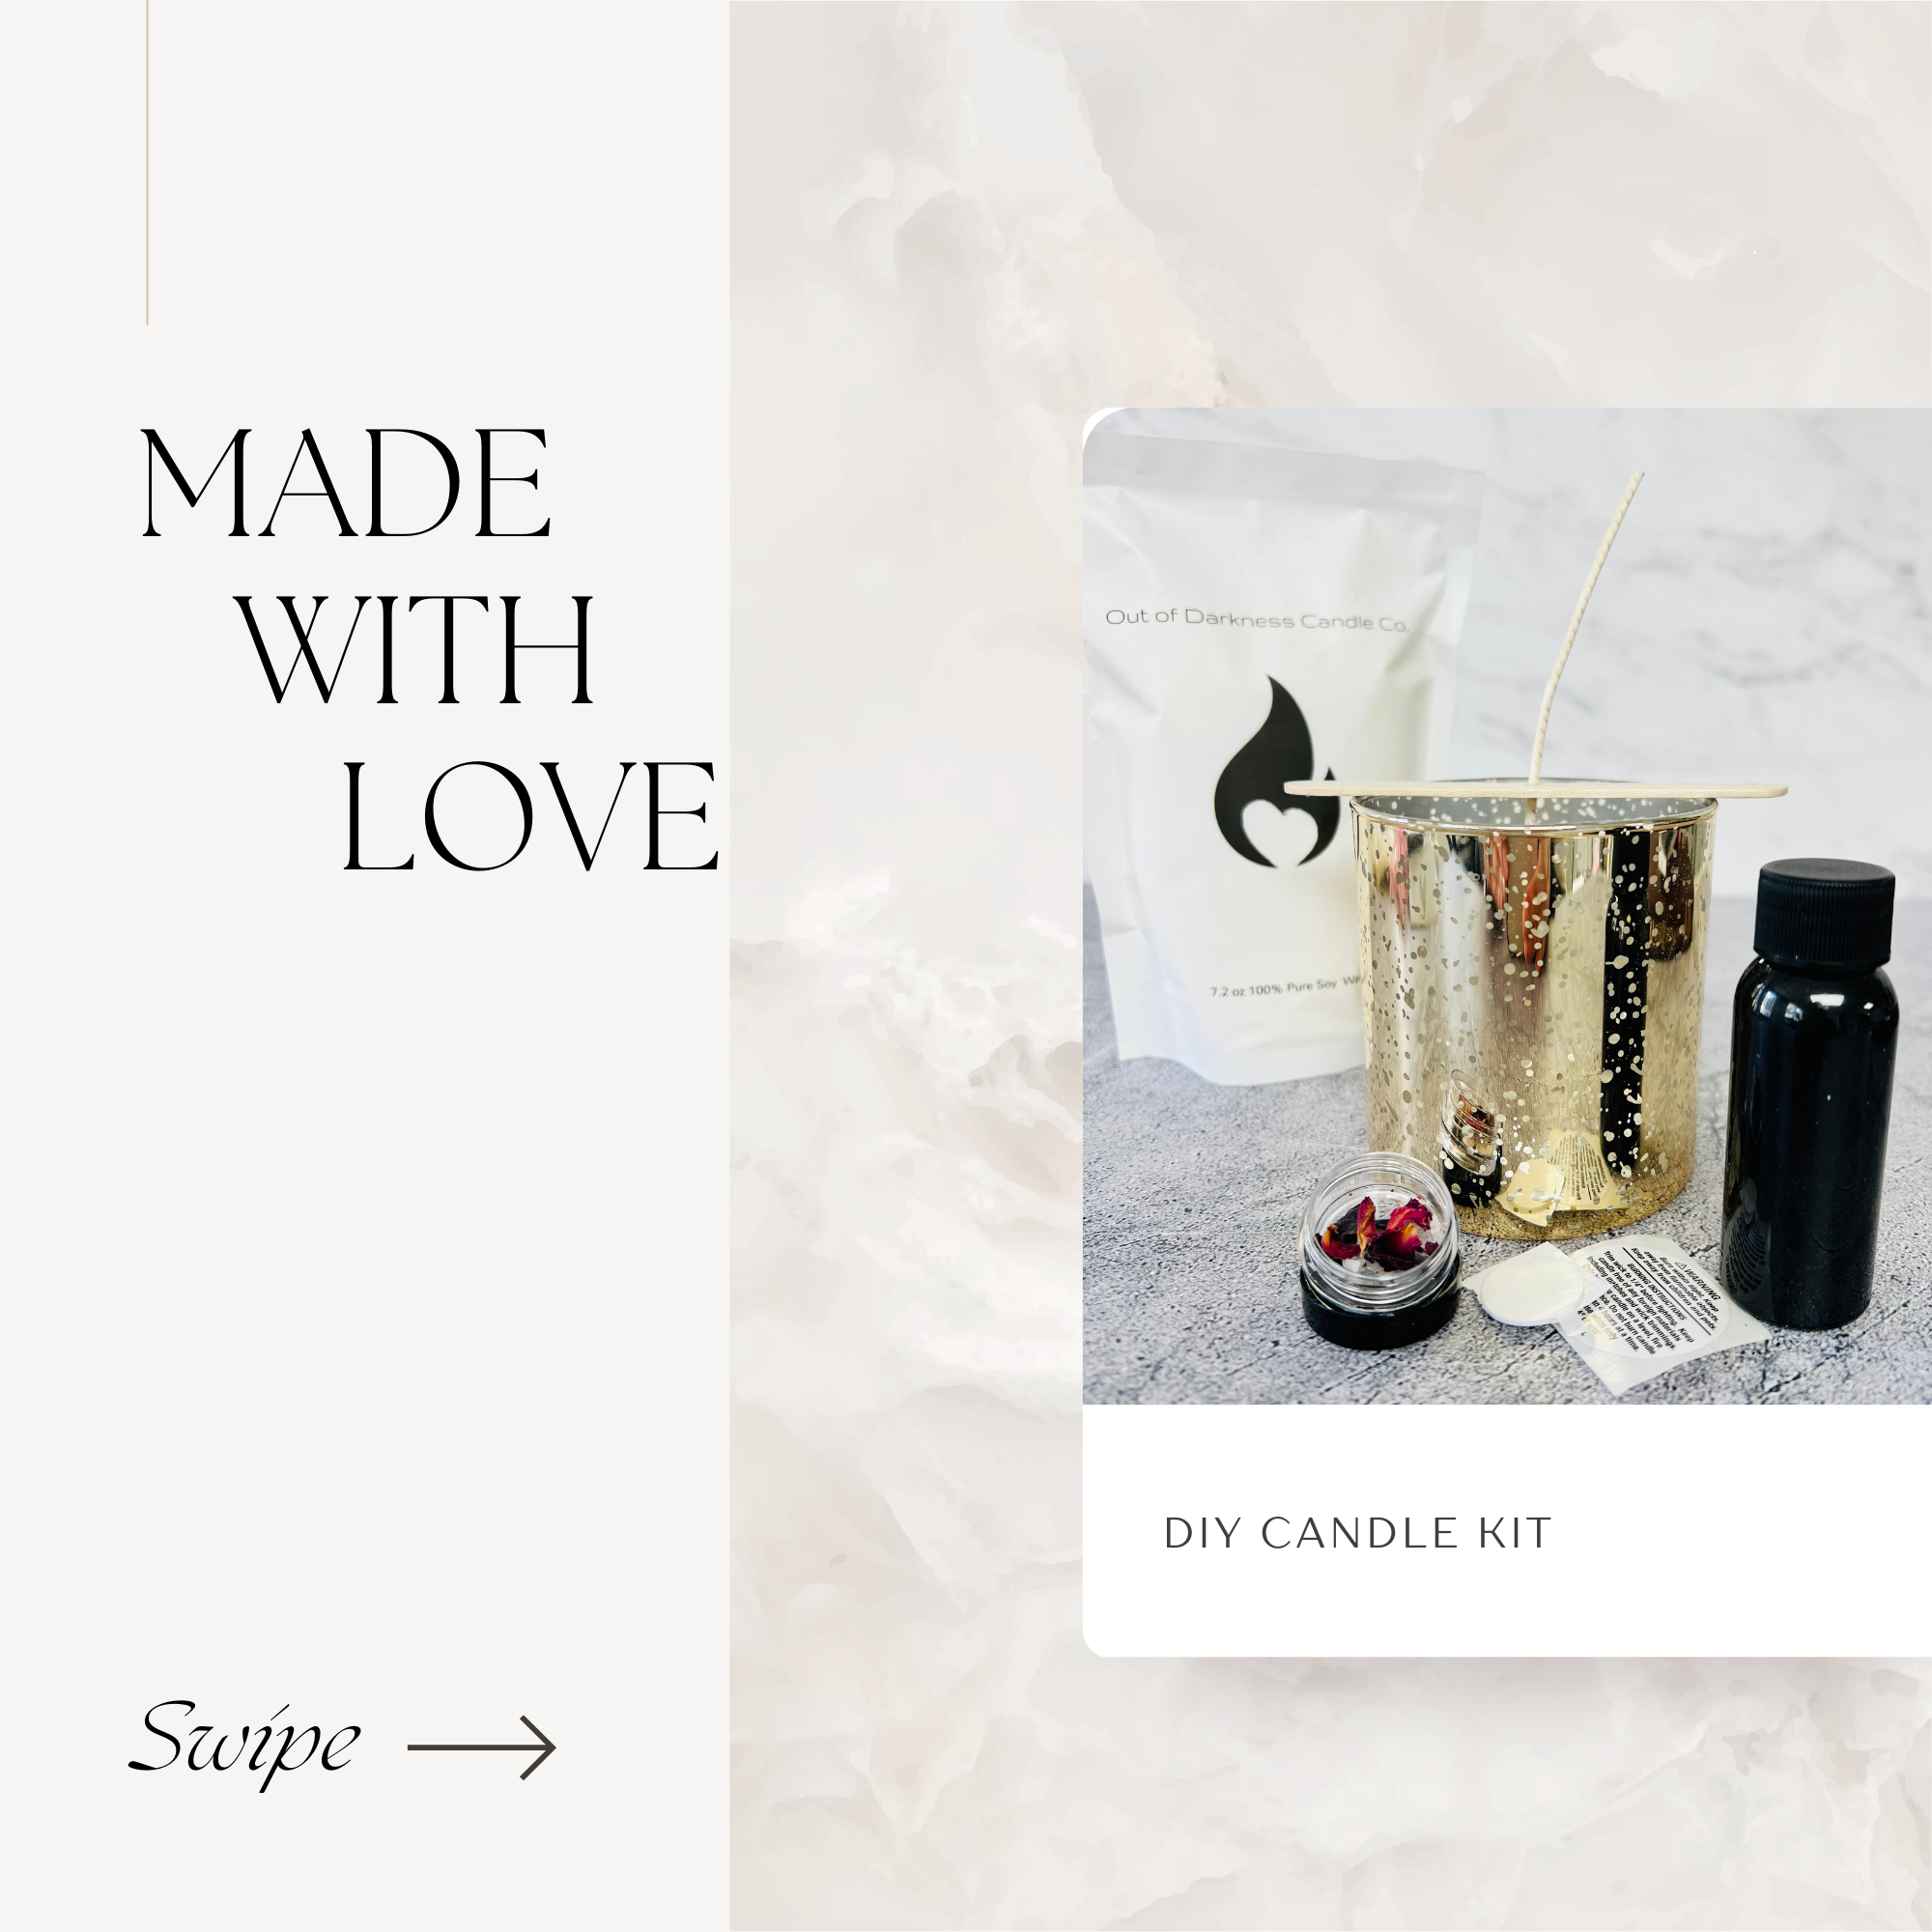 Graphic says made with love DIY Candle Kit-Gold fleck vessel with a cotton with and wooden holder surrounded by a black bottle, a warning sticker, a small container with rose petals and a white bag with black flame company logo on it